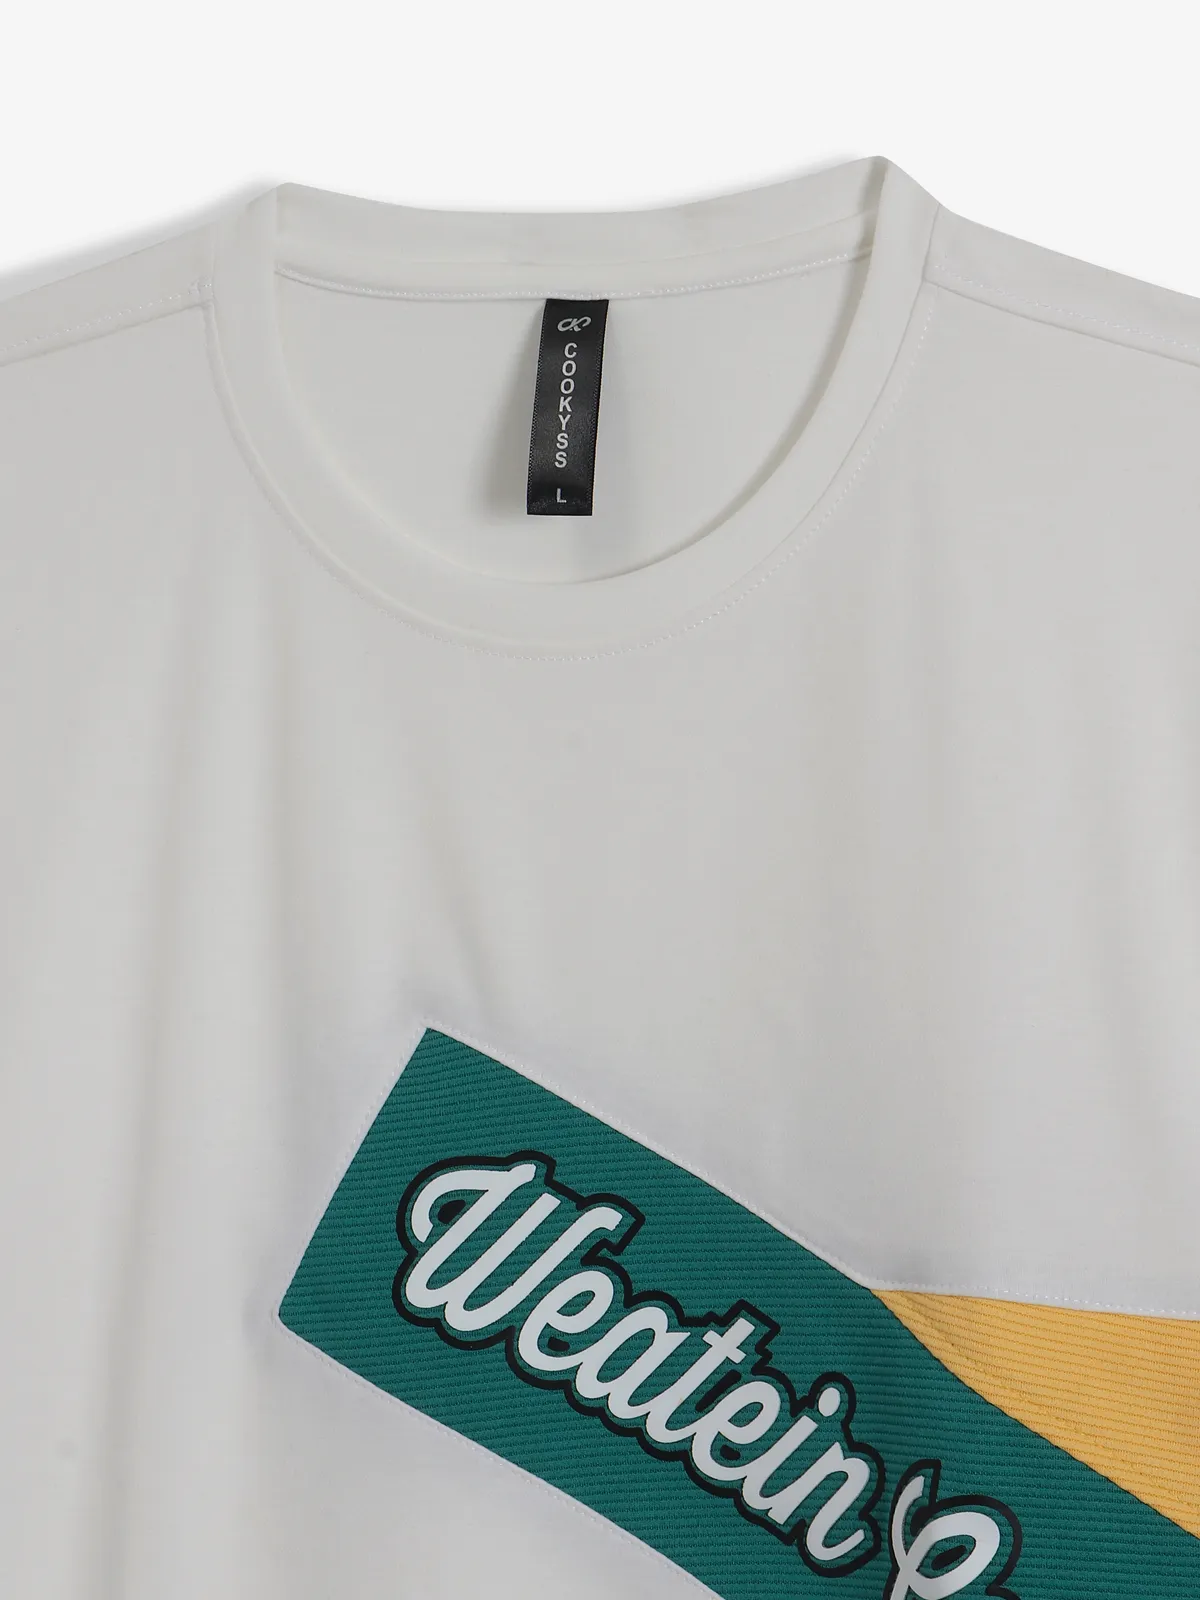 COOKYSS cotton printed off-white t-shirt